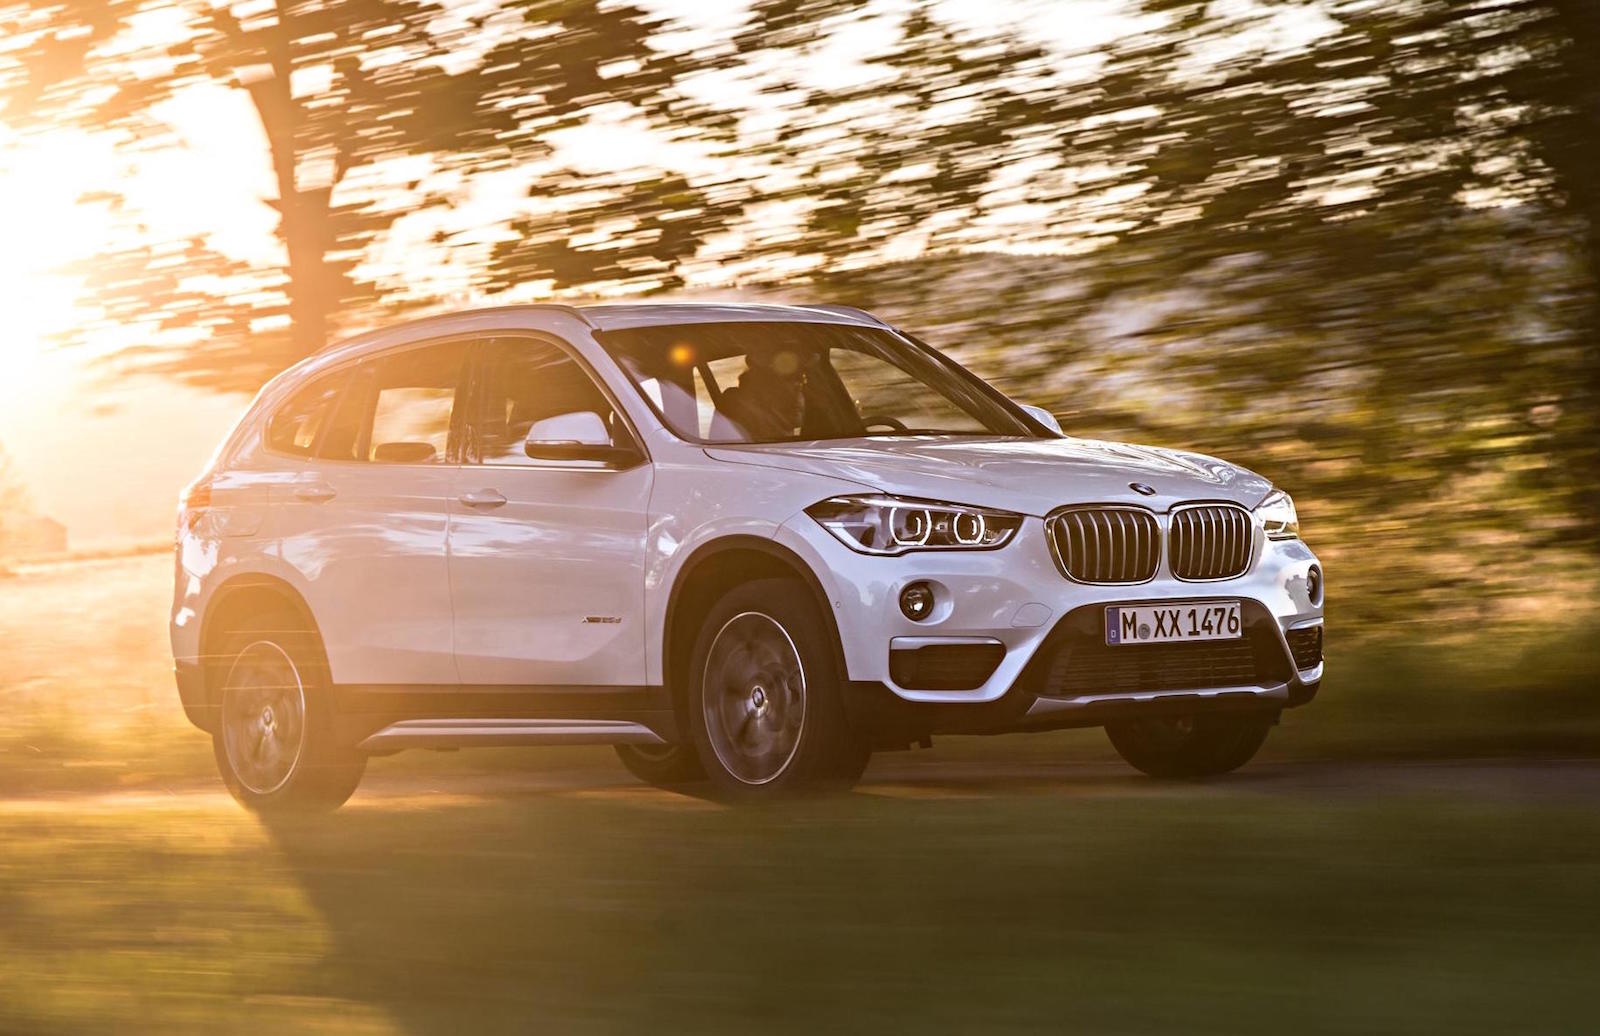 2019 BMW X1 & X2 on sale in Australia, price cuts of up to $3700